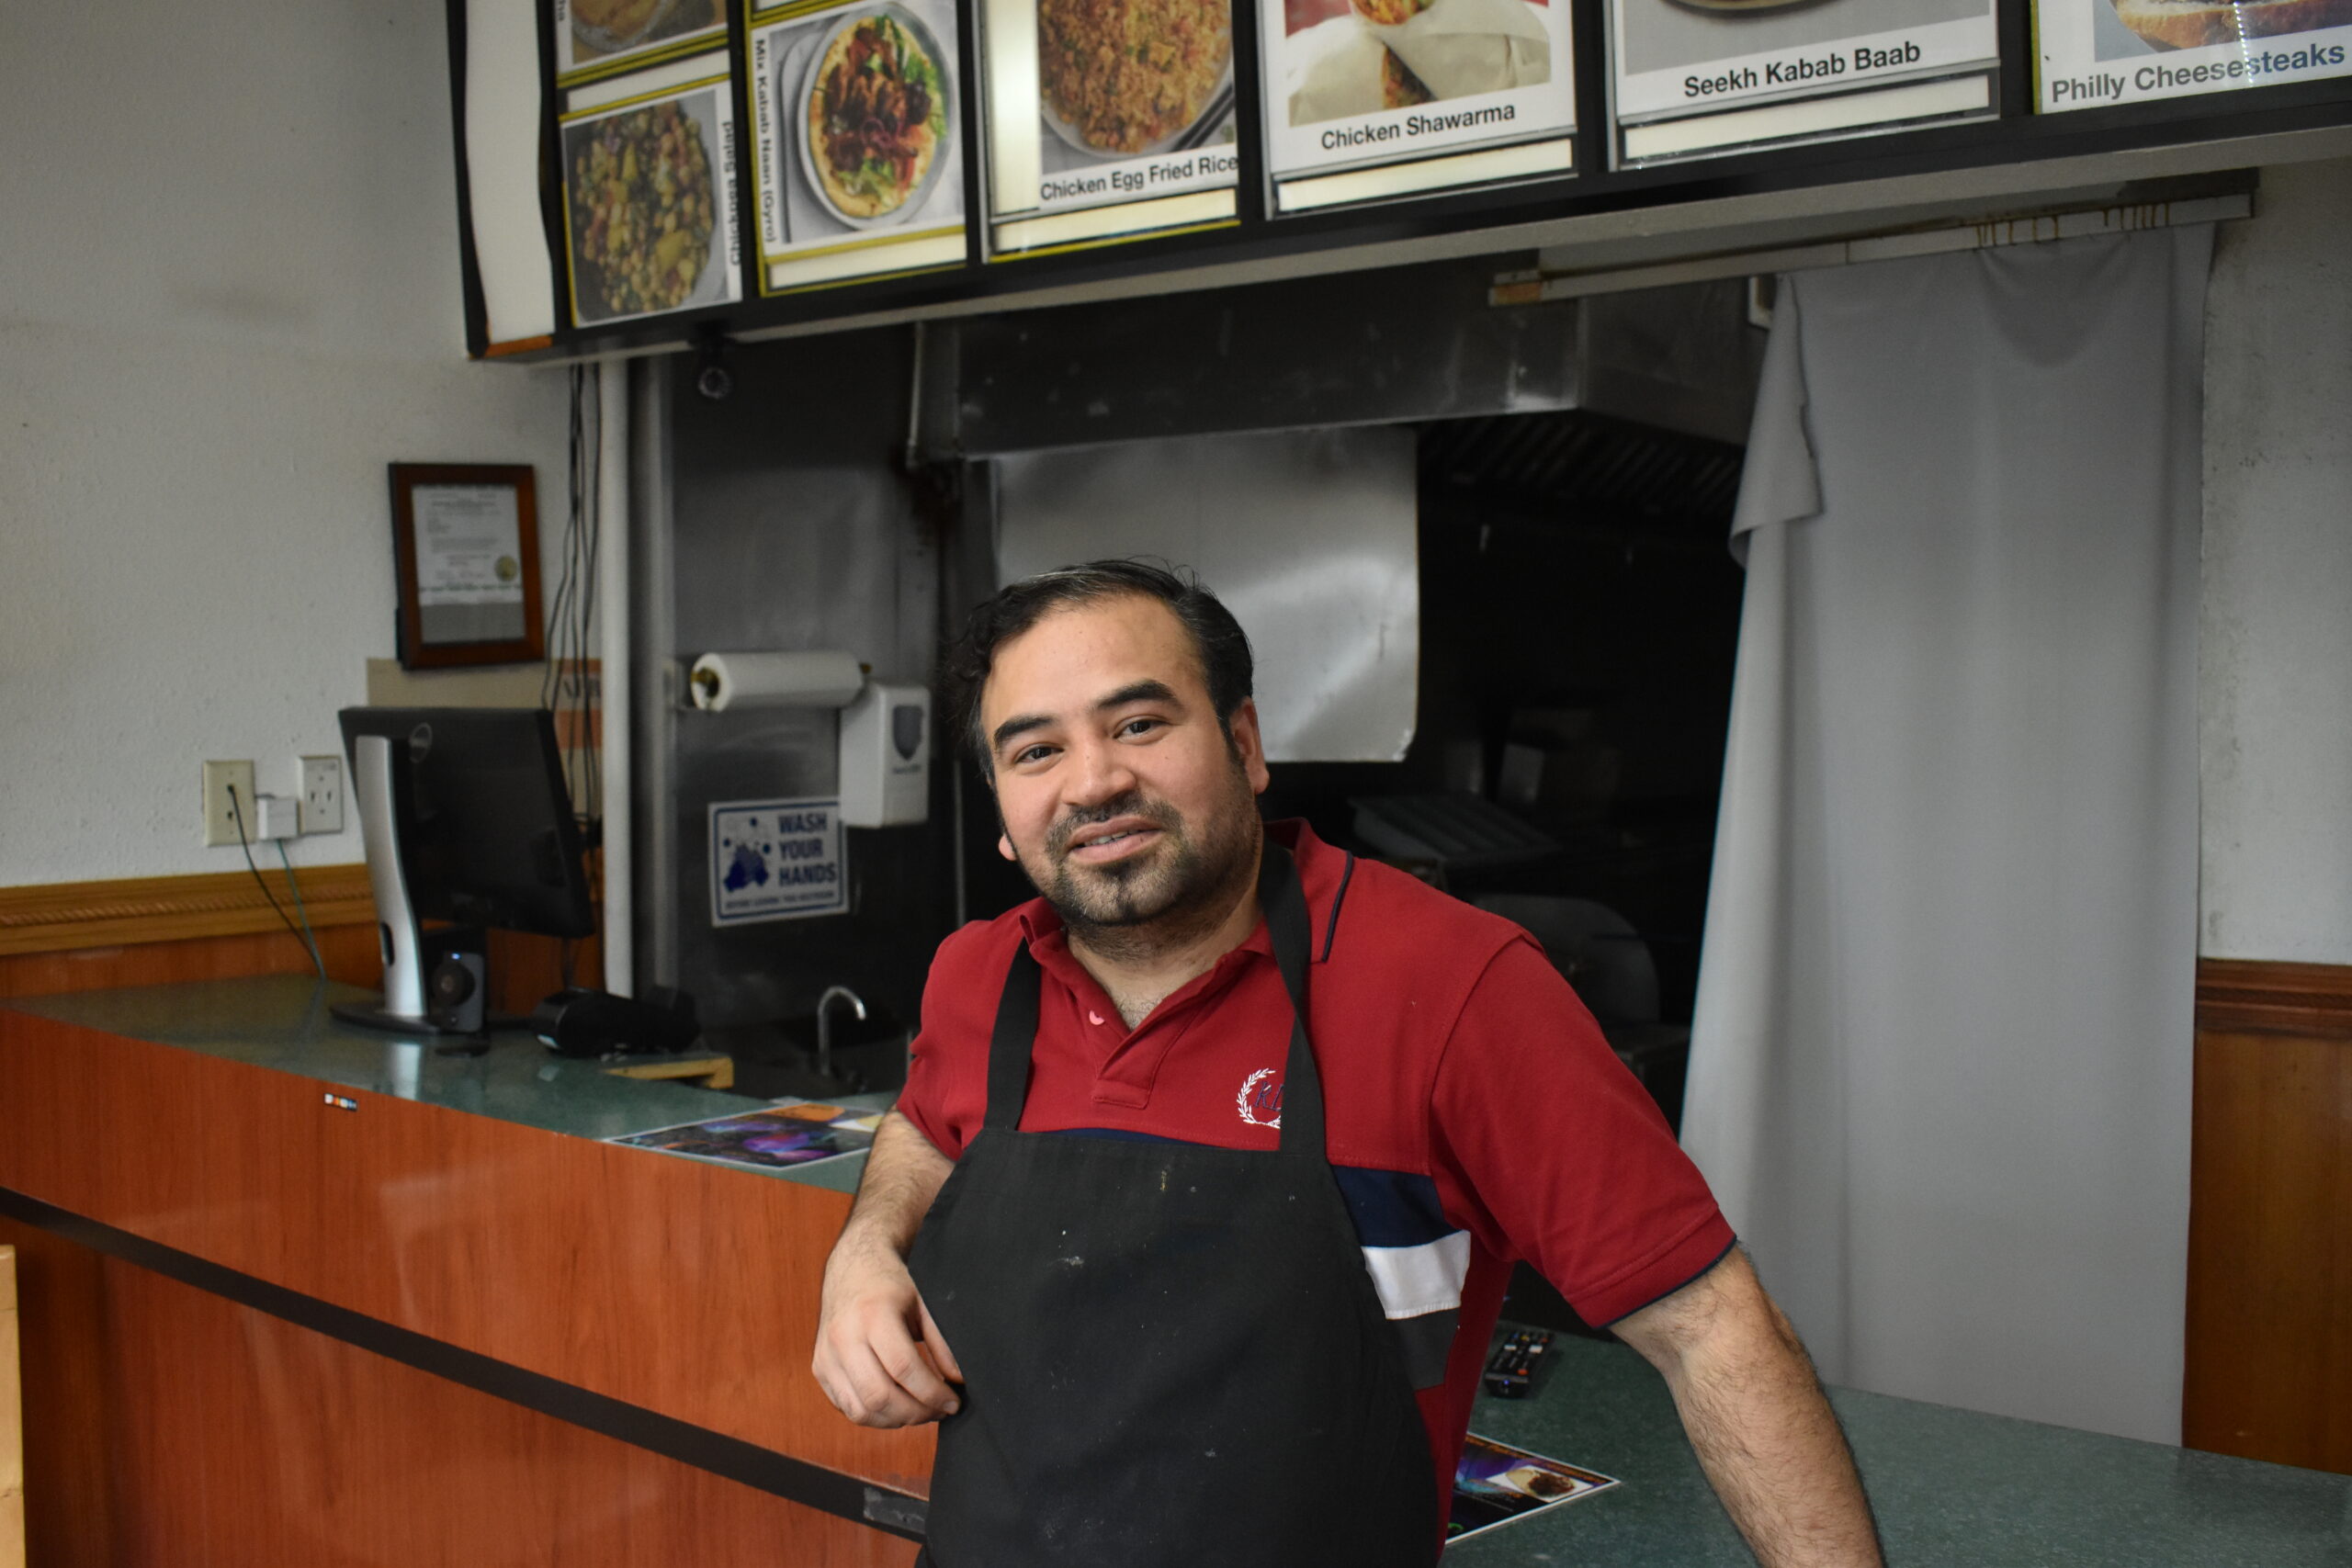 Fawad Nawaz, owner of Hot & Roll, stands at his counter. Hot & Roll is the only Pakistani restaurant in Iowa City. CREDIT ANNIE BARKALOW